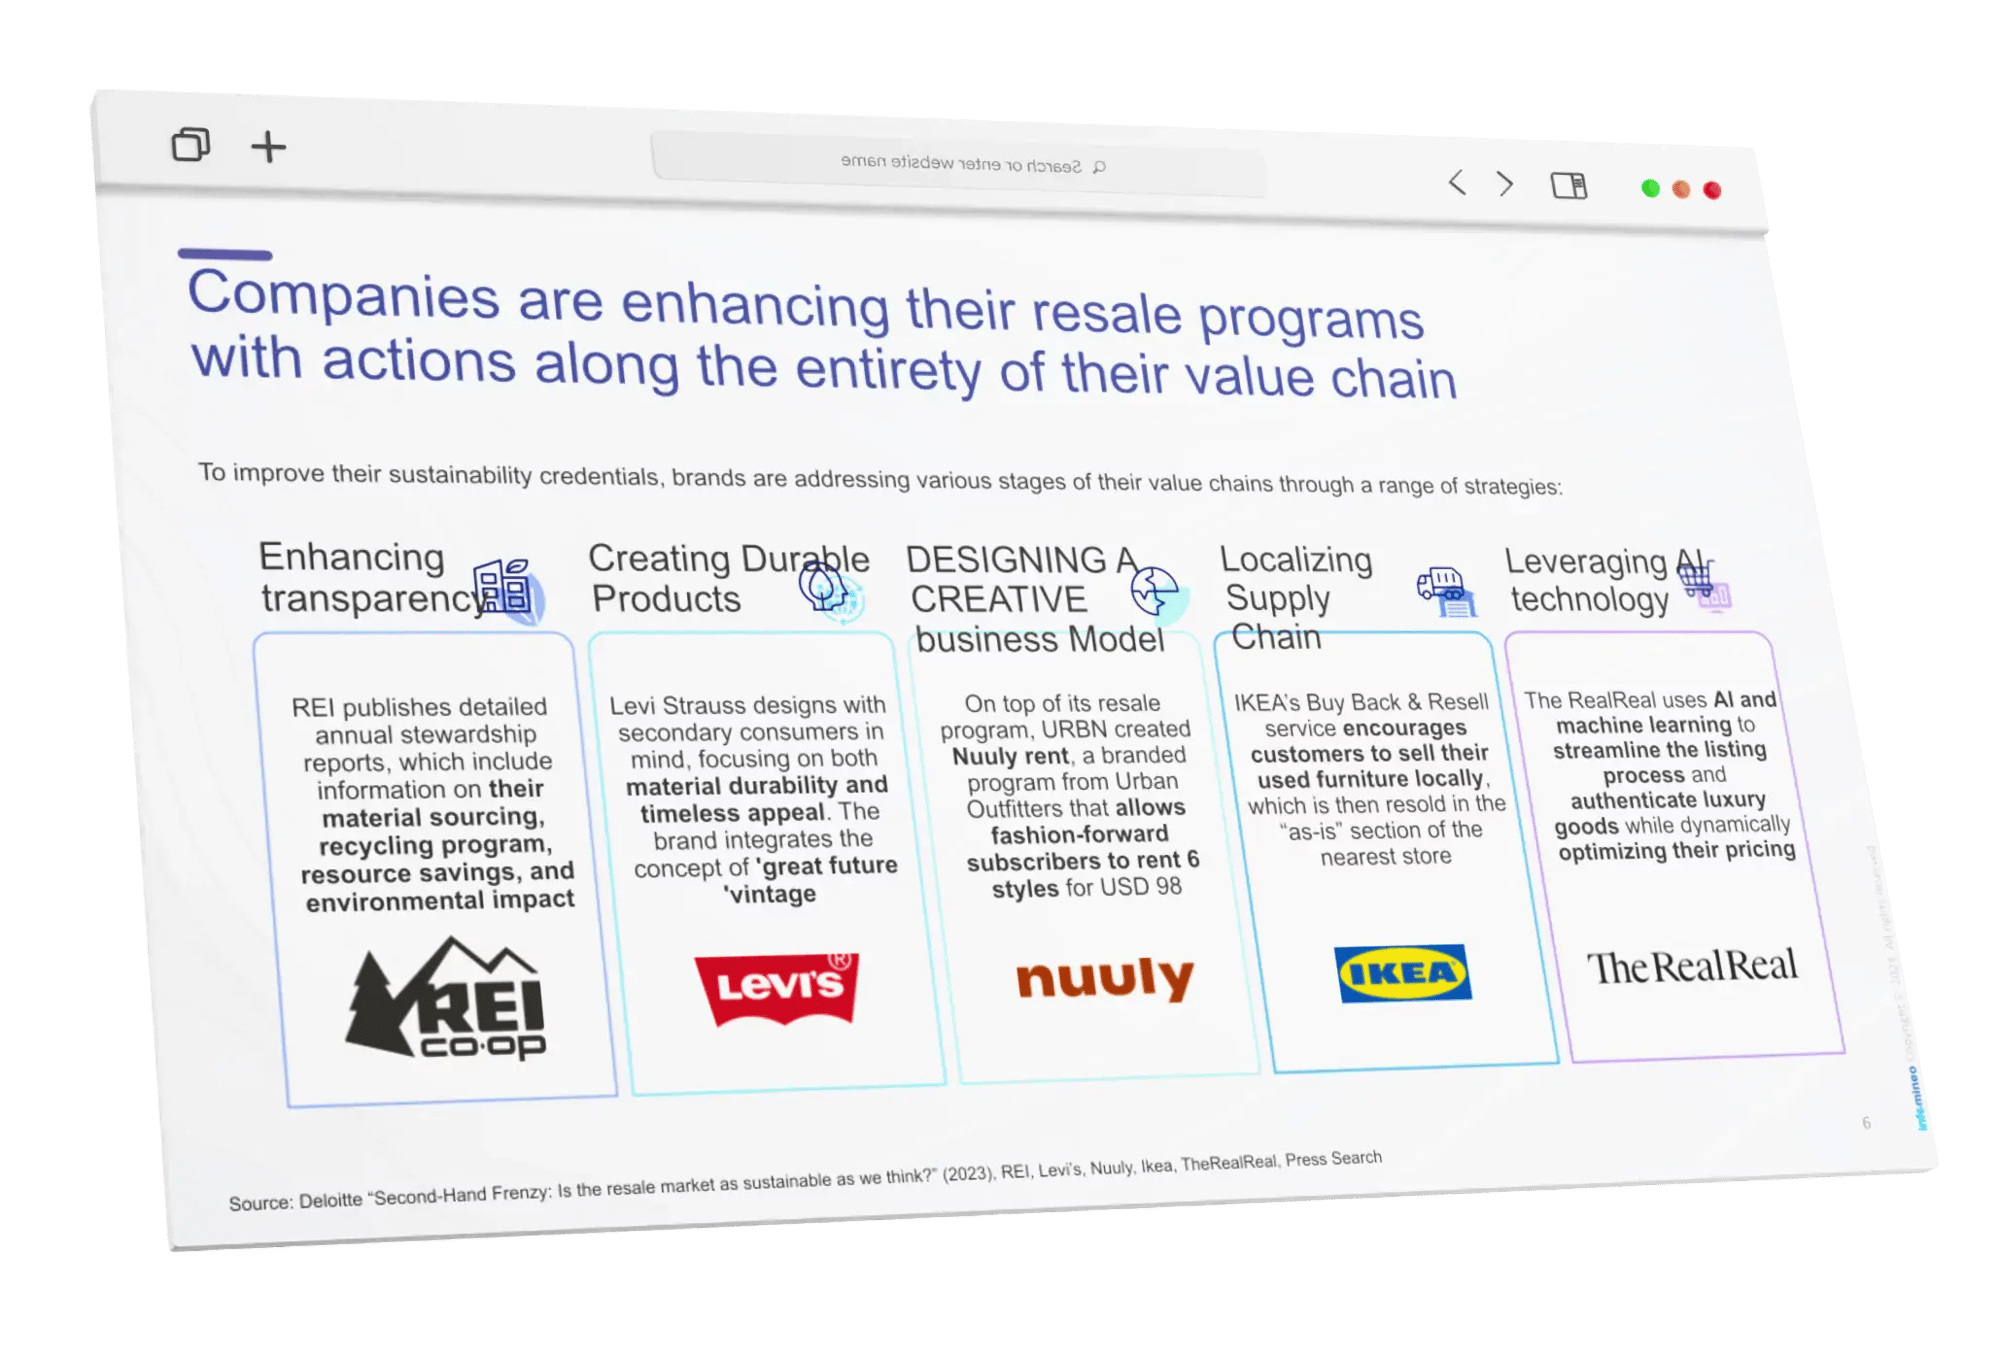 Companies are enhancing their resale programs with actions along the entirety of their value chain